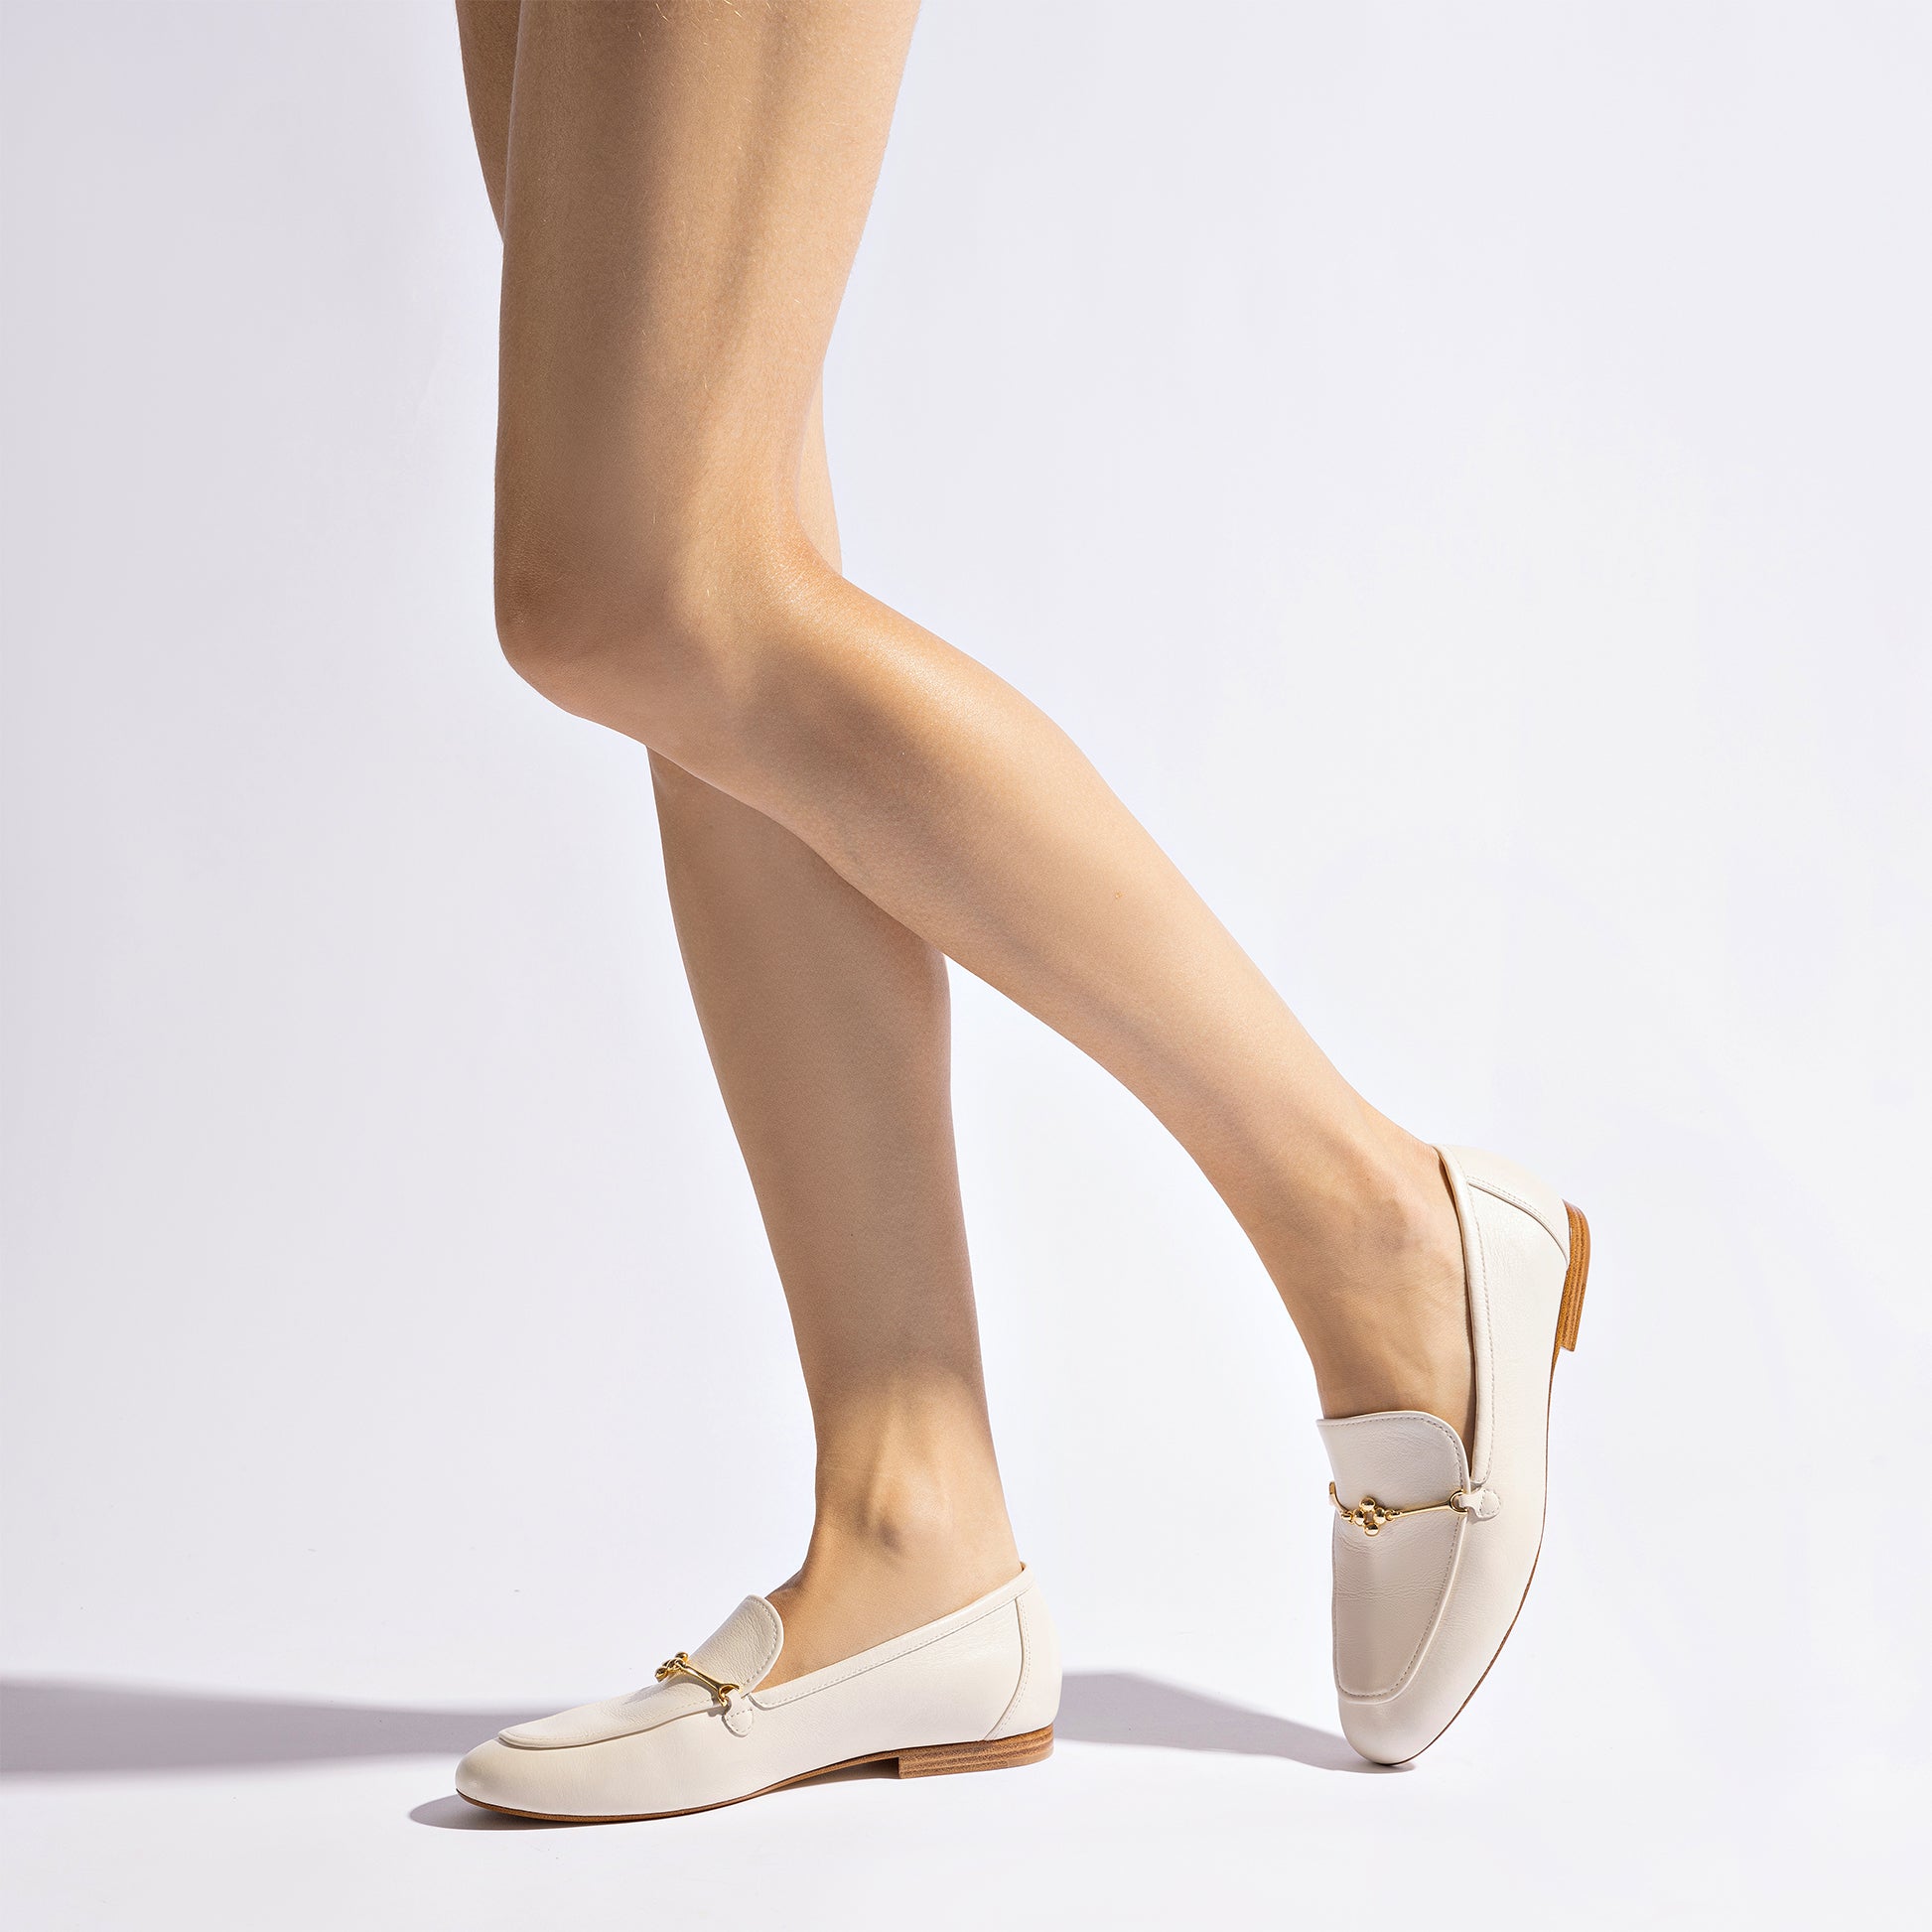 Katherine Loafer In Ivory Leather